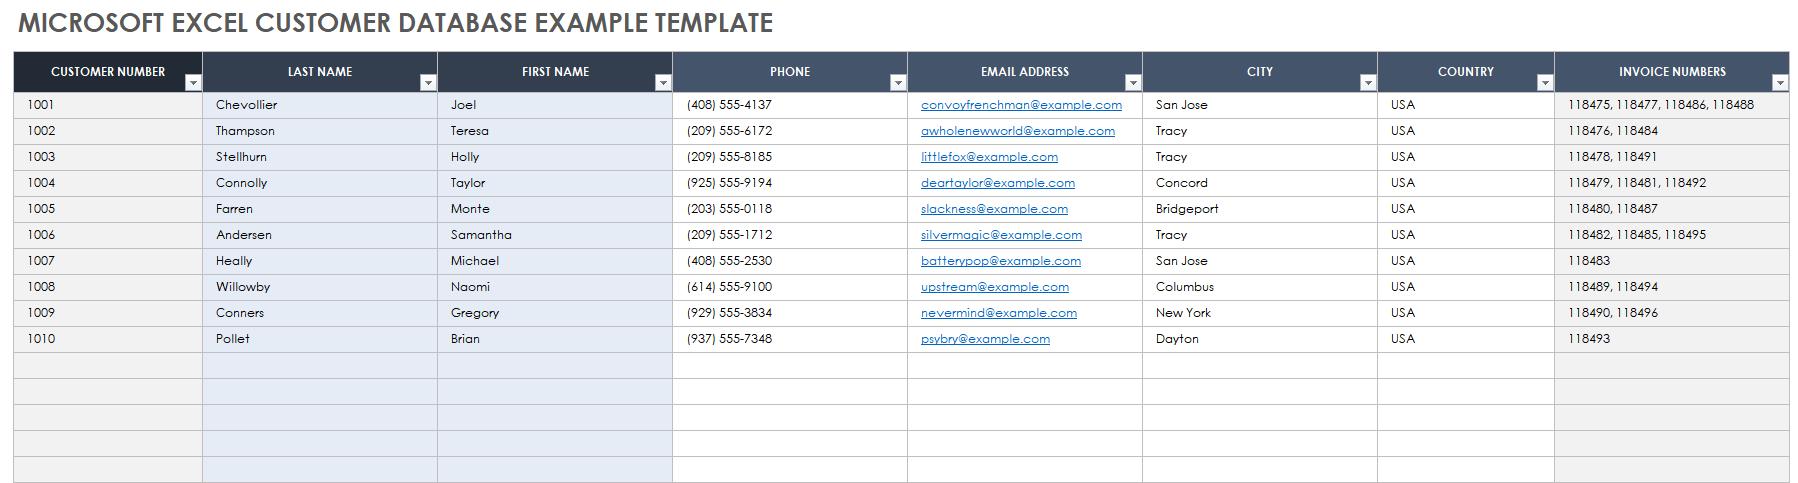 Customer Database Example Template